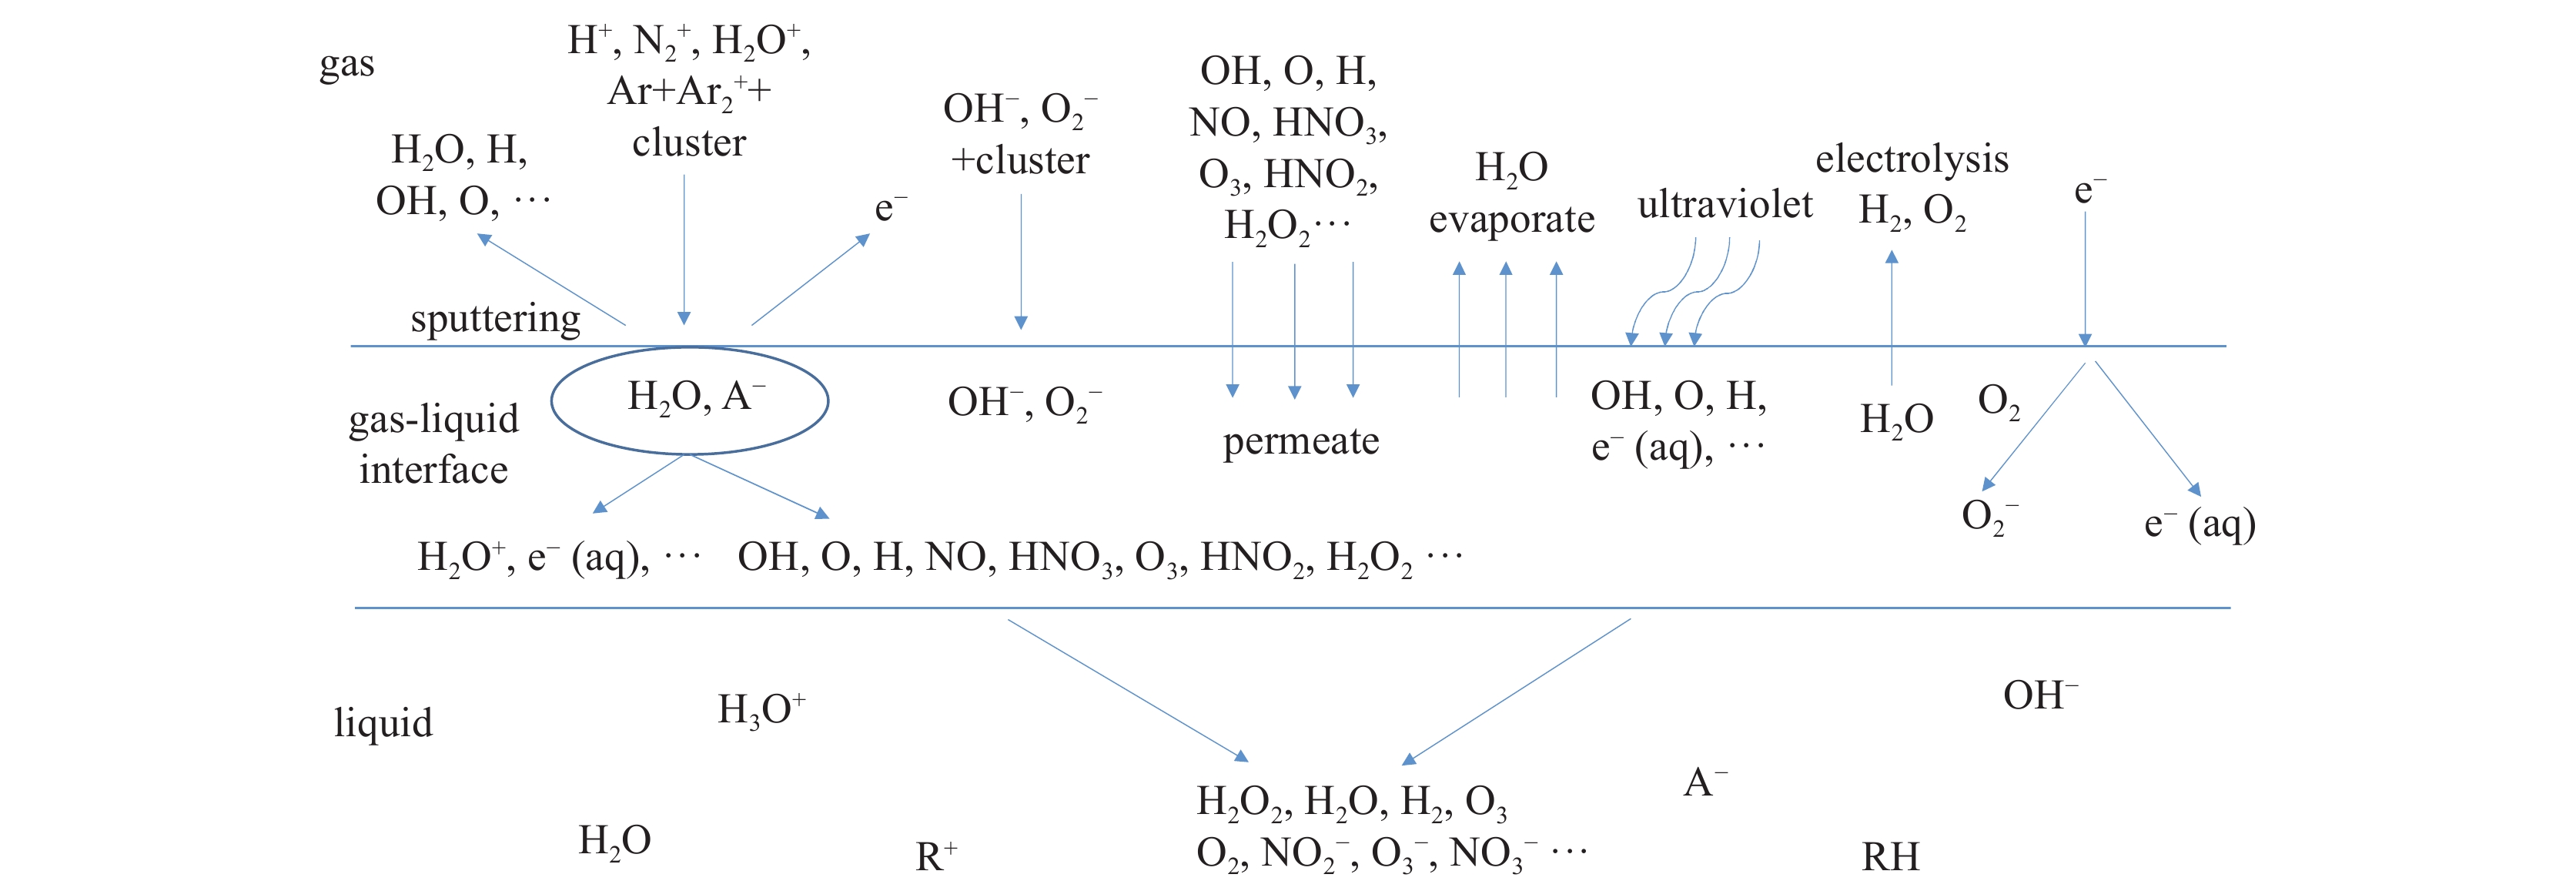 Schematic diagram of mass transfer, reaction and active components that may exist in non-contact liquid plasma[10]